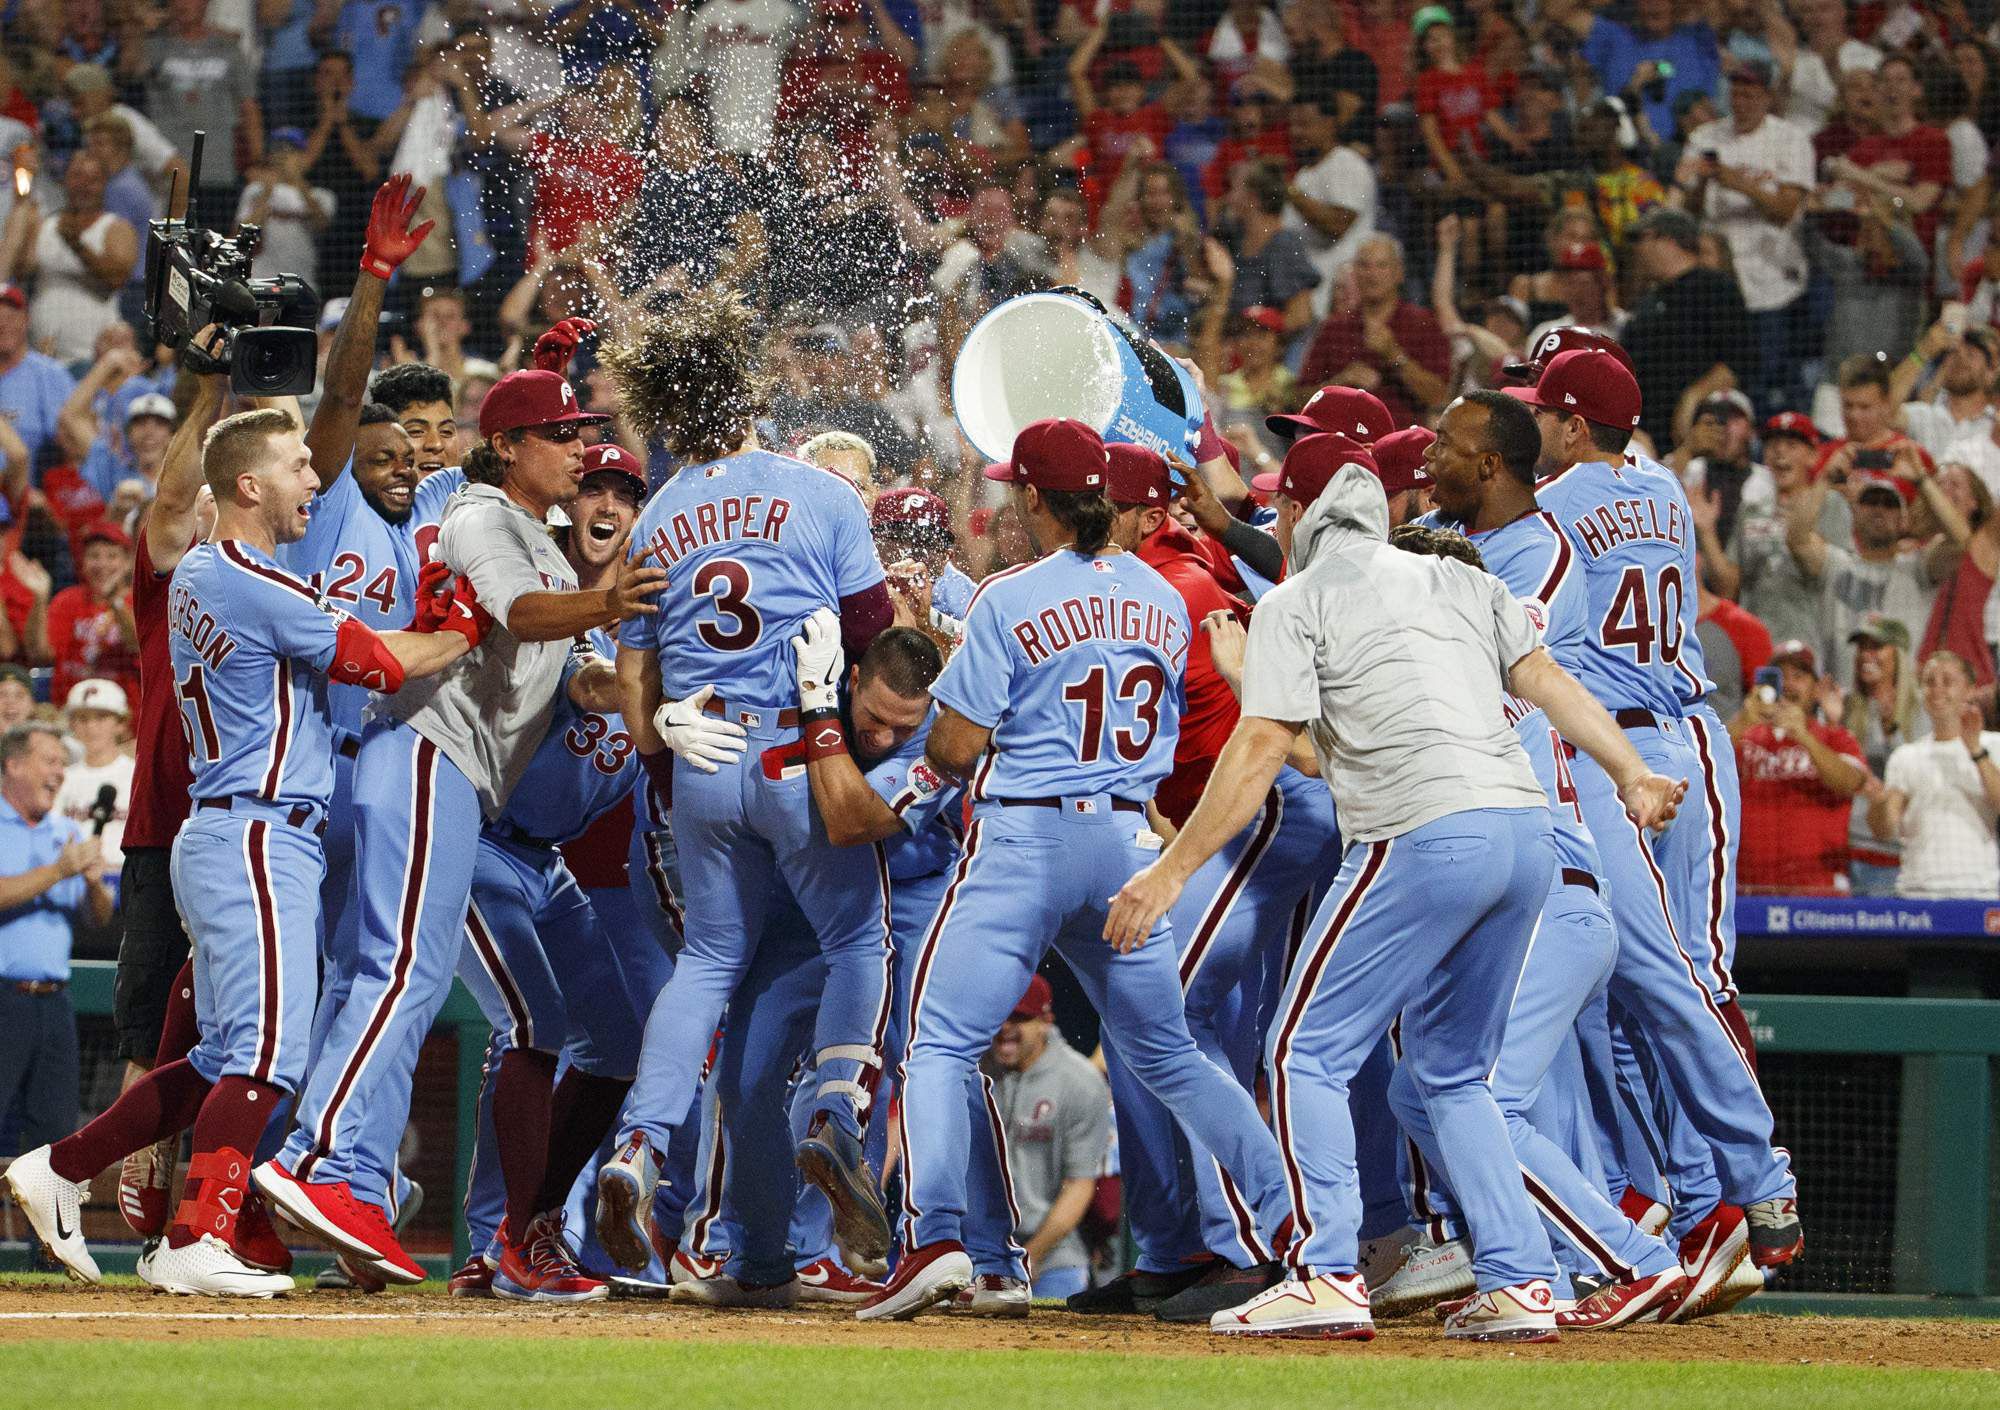 Watch: You may not see a more joyful celebration than Bryce